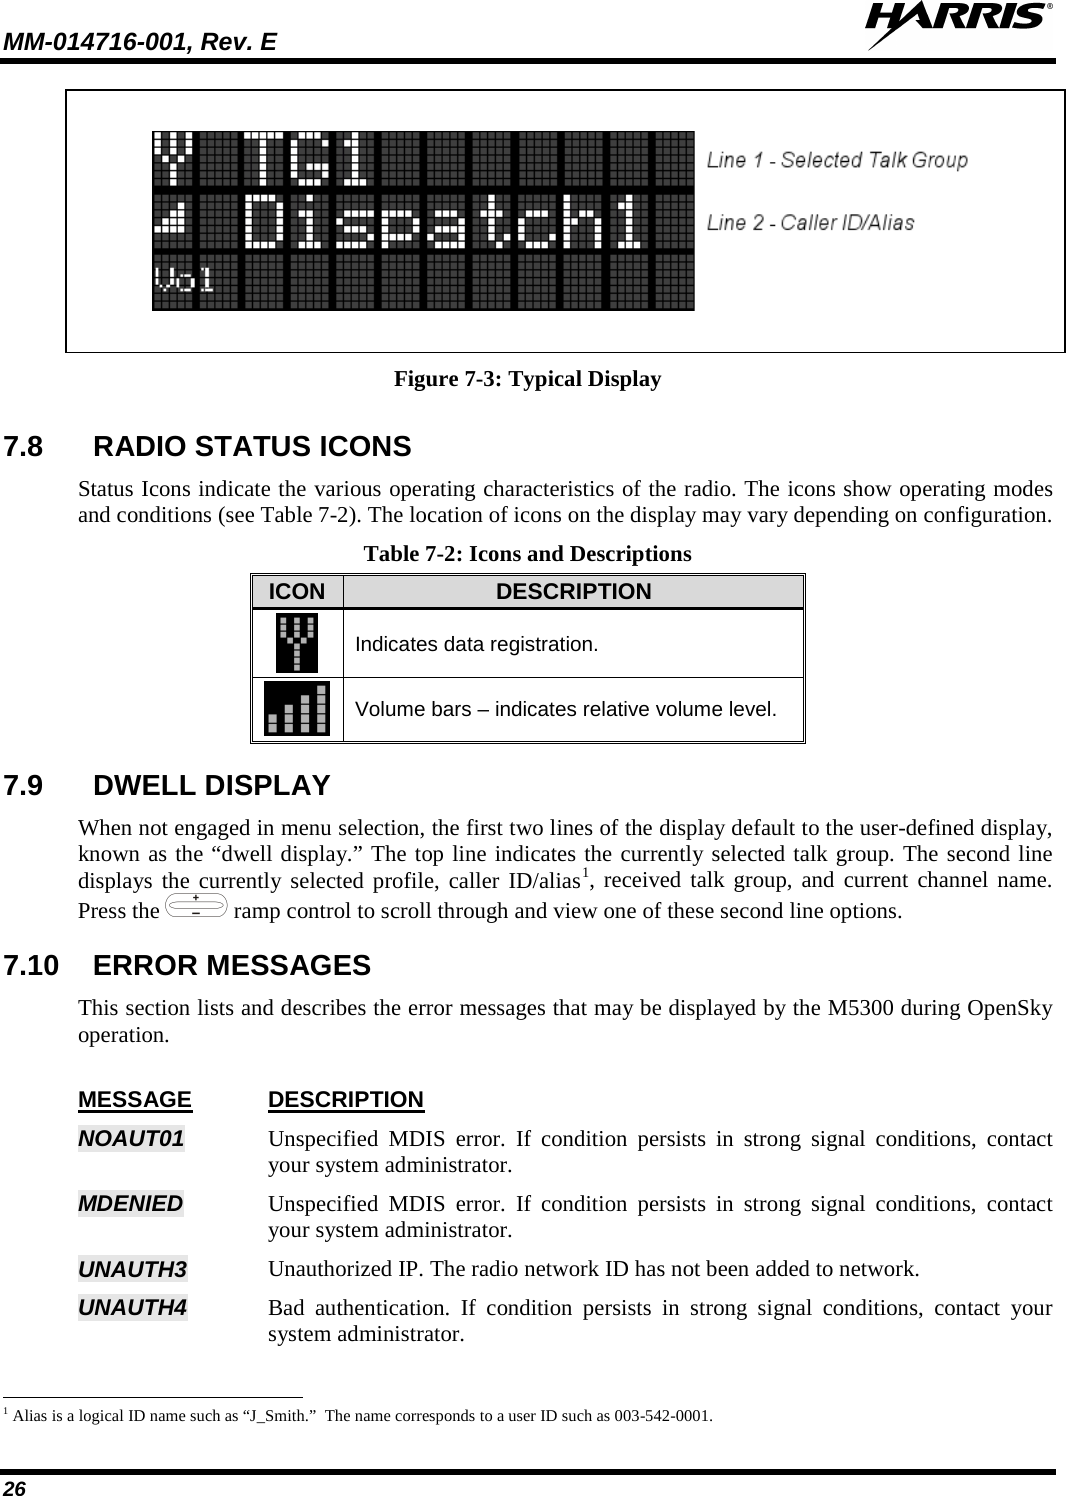 MM-014716-001, Rev. E  26    Figure 7-3: Typical Display 7.8 RADIO STATUS ICONS Status Icons indicate the various operating characteristics of the radio. The icons show operating modes and conditions (see Table 7-2). The location of icons on the display may vary depending on configuration. Table 7-2: Icons and Descriptions ICON DESCRIPTION  Indicates data registration.  Volume bars – indicates relative volume level. 7.9 DWELL DISPLAY When not engaged in menu selection, the first two lines of the display default to the user-defined display, known as the “dwell display.” The top line indicates the currently selected talk group. The second line displays the currently selected profile, caller ID/alias1, received talk group, and current channel name. Press the   ramp control to scroll through and view one of these second line options.  7.10 ERROR MESSAGES This section lists and describes the error messages that may be displayed by the M5300 during OpenSky operation.  MESSAGE DESCRIPTION NOAUT01 Unspecified MDIS error. If condition persists in strong signal conditions, contact your system administrator. MDENIED  Unspecified MDIS error. If condition persists in strong signal conditions, contact your system administrator. UNAUTH3 Unauthorized IP. The radio network ID has not been added to network. UNAUTH4 Bad authentication. If condition persists in strong signal conditions, contact your system administrator.                                                            1 Alias is a logical ID name such as “J_Smith.”  The name corresponds to a user ID such as 003-542-0001. 